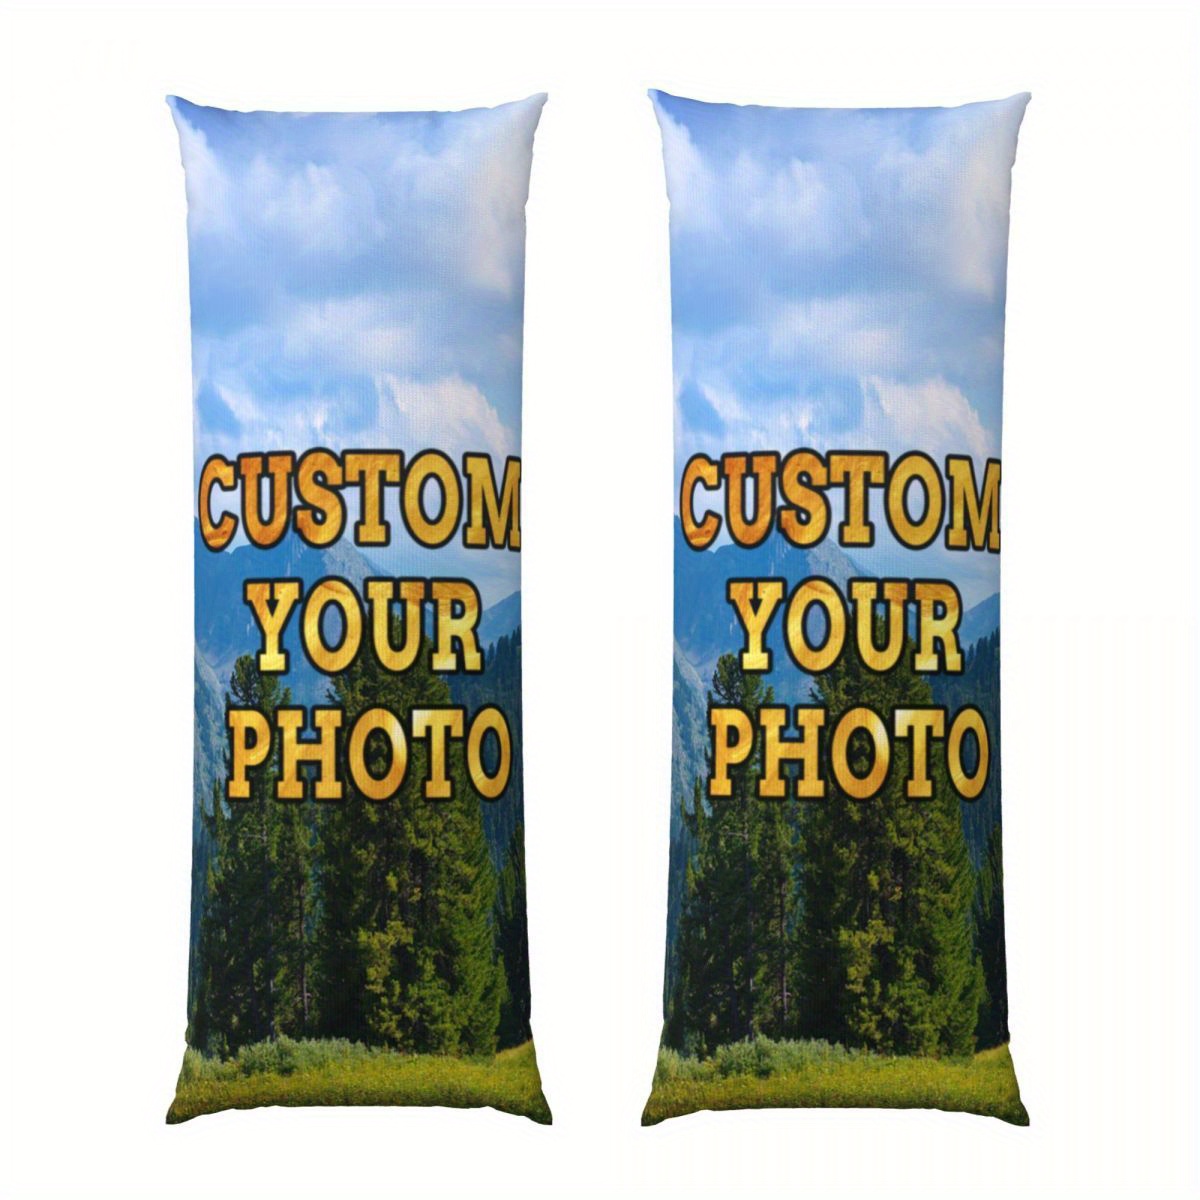 

Custom Photo Pillowcase - Soft Polyester Plush, Double-sided Print, 20x54 Inches - Perfect For Sofa & Bedroom Decor, Machine Washable With Zipper Closure